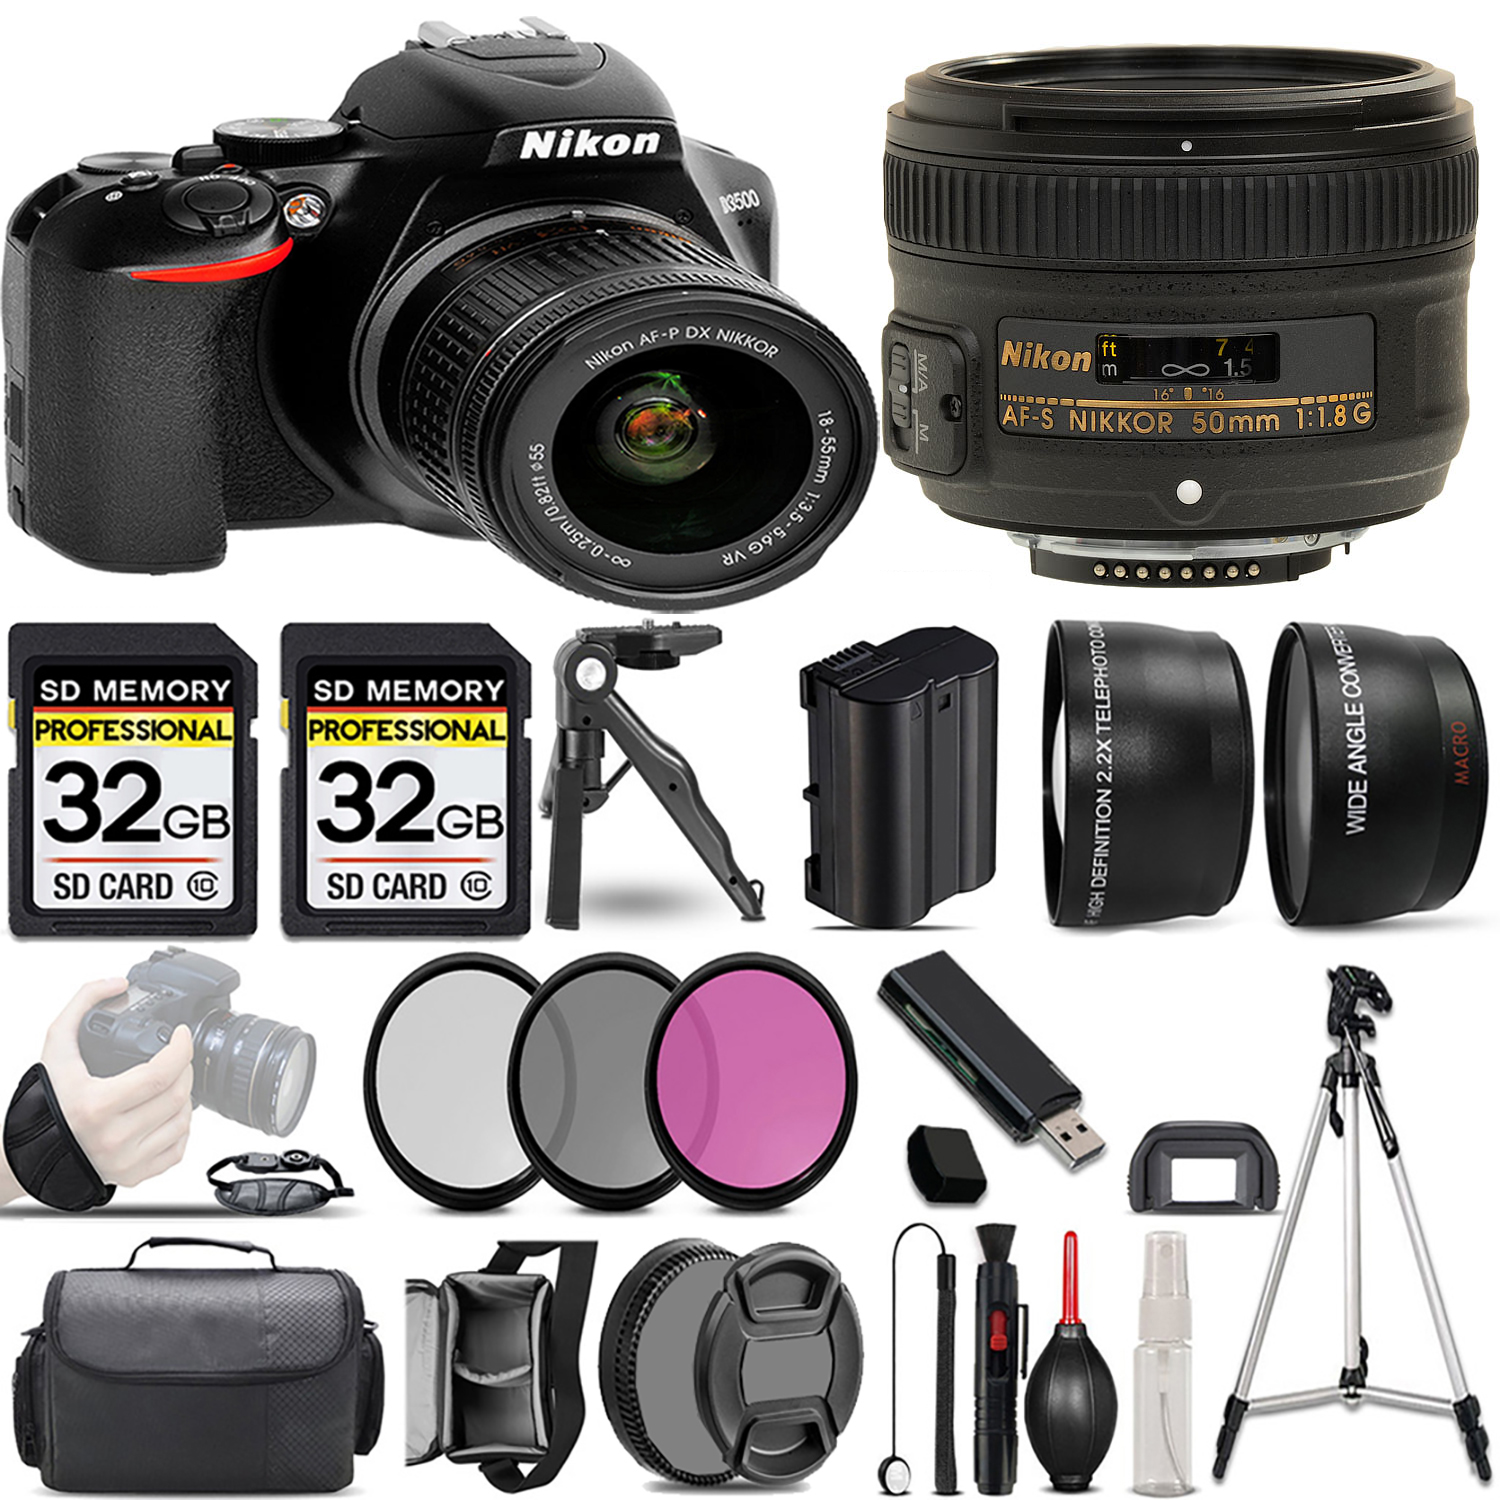 D3500 DSLR Camera with 18-55mm Lens + 50mm f/1.8 Lens + 3 Piece Filter Set + 64GB *FREE SHIPPING*